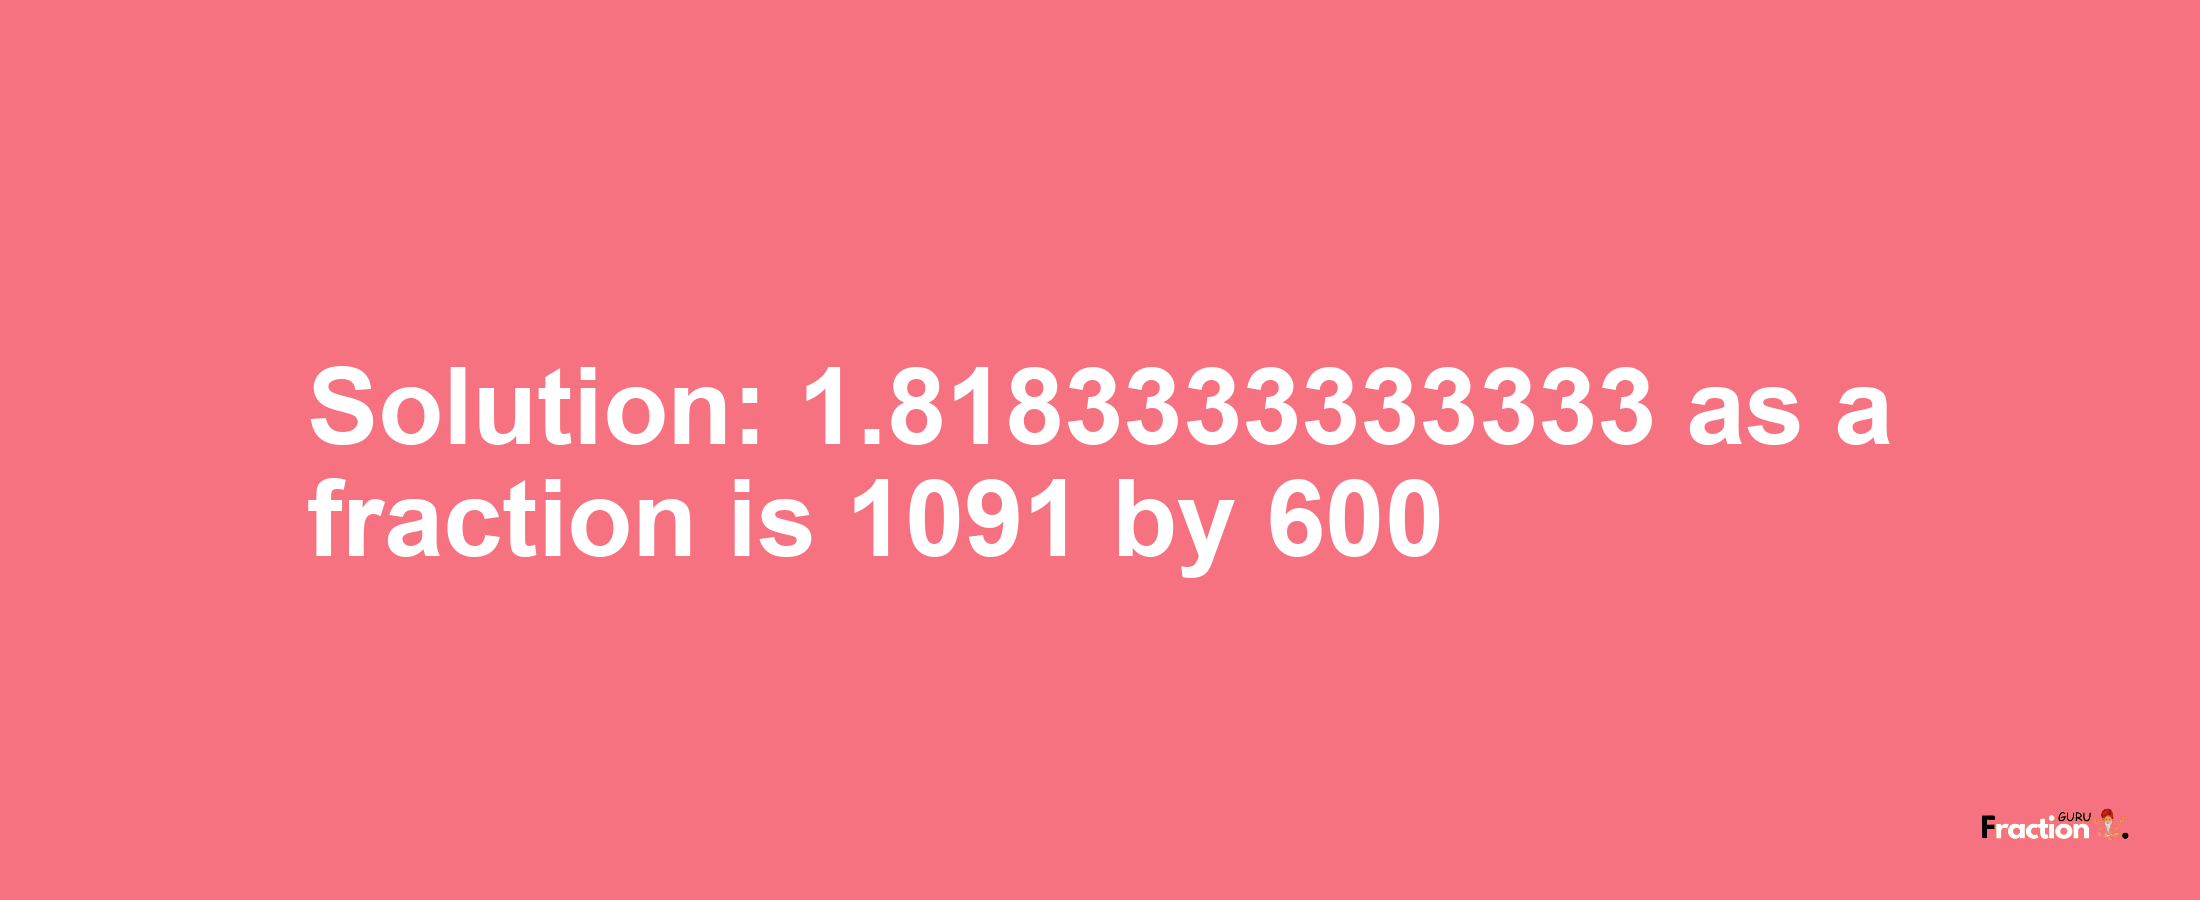 Solution:1.8183333333333 as a fraction is 1091/600